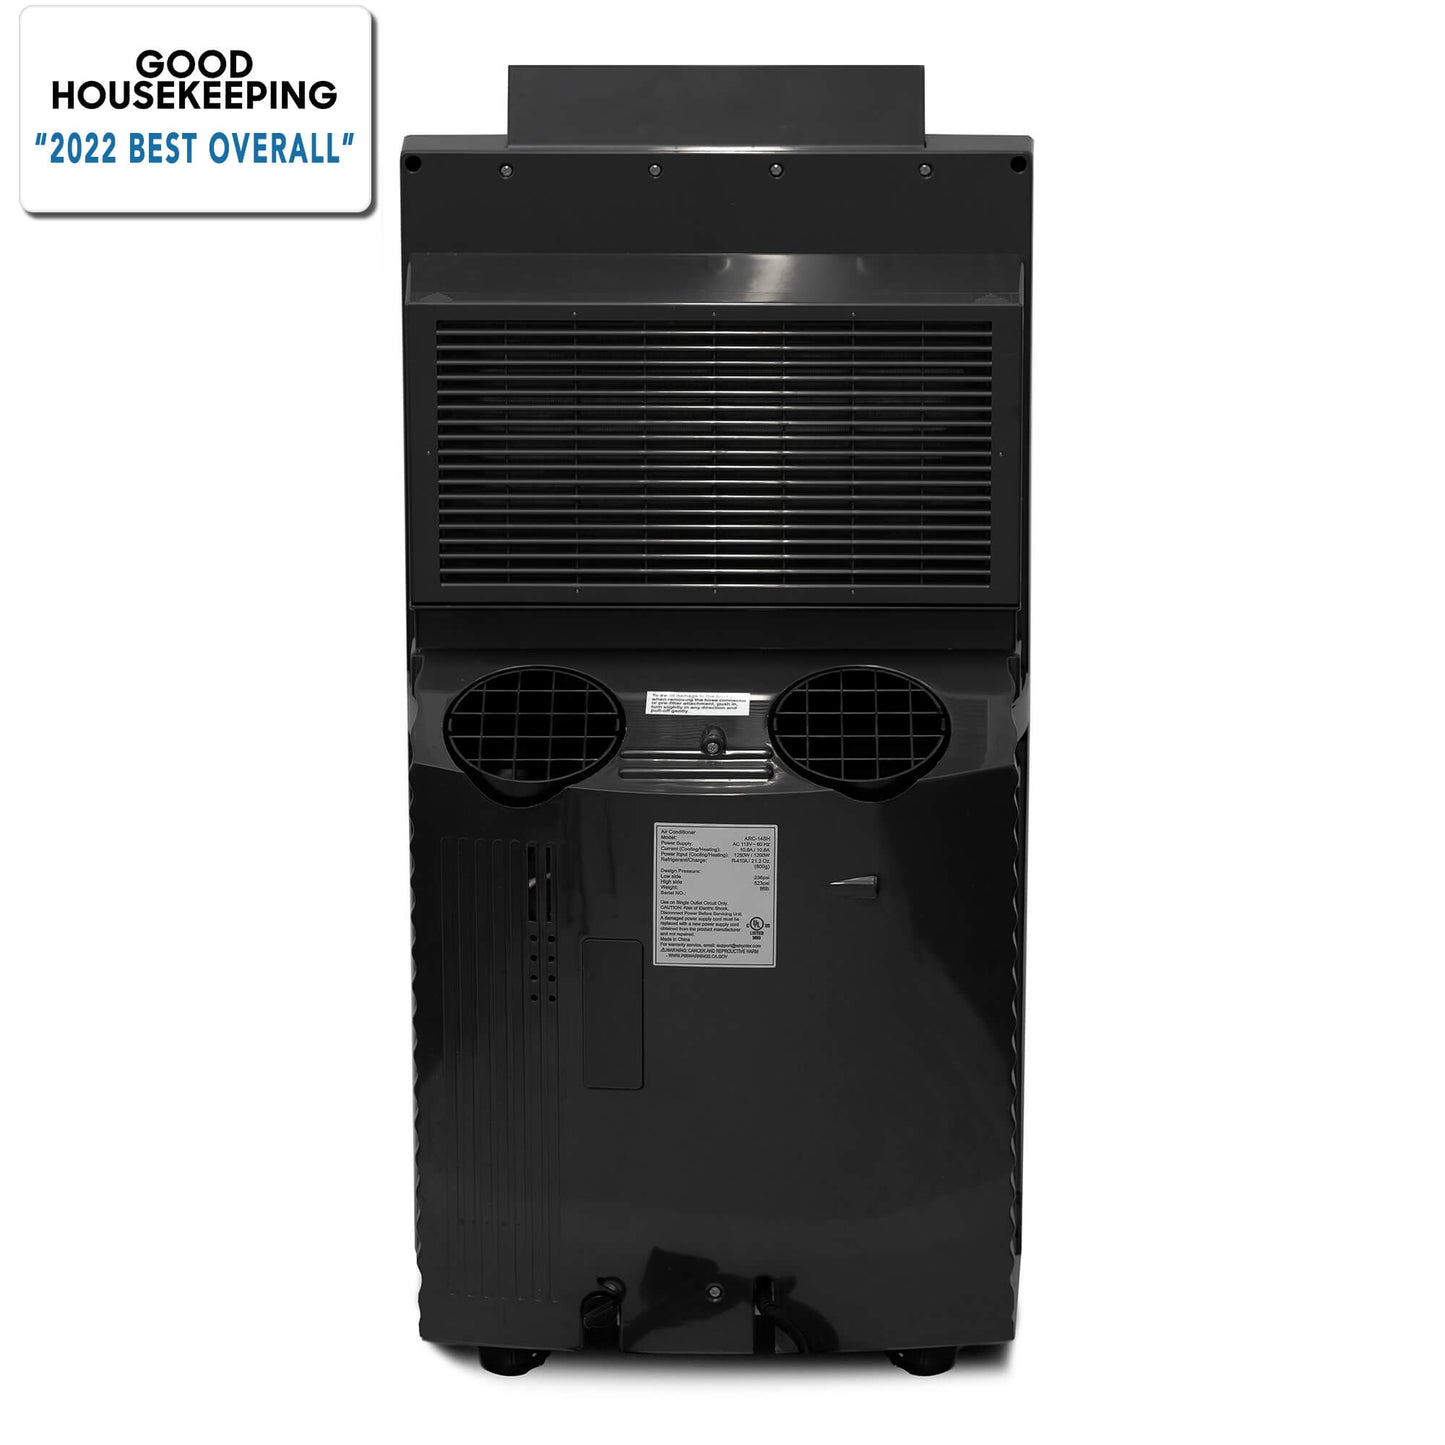 Whynter Air Conditioners Whynter ARC-14S 14,000 (9,200 BTU SACC) BTU Dual Hose Cooling Portable Air Conditioner, Dehumidifier, and Fan with Activated Carbon Filter plus Storage bag, up to 500 sq ft in Platinum/Black